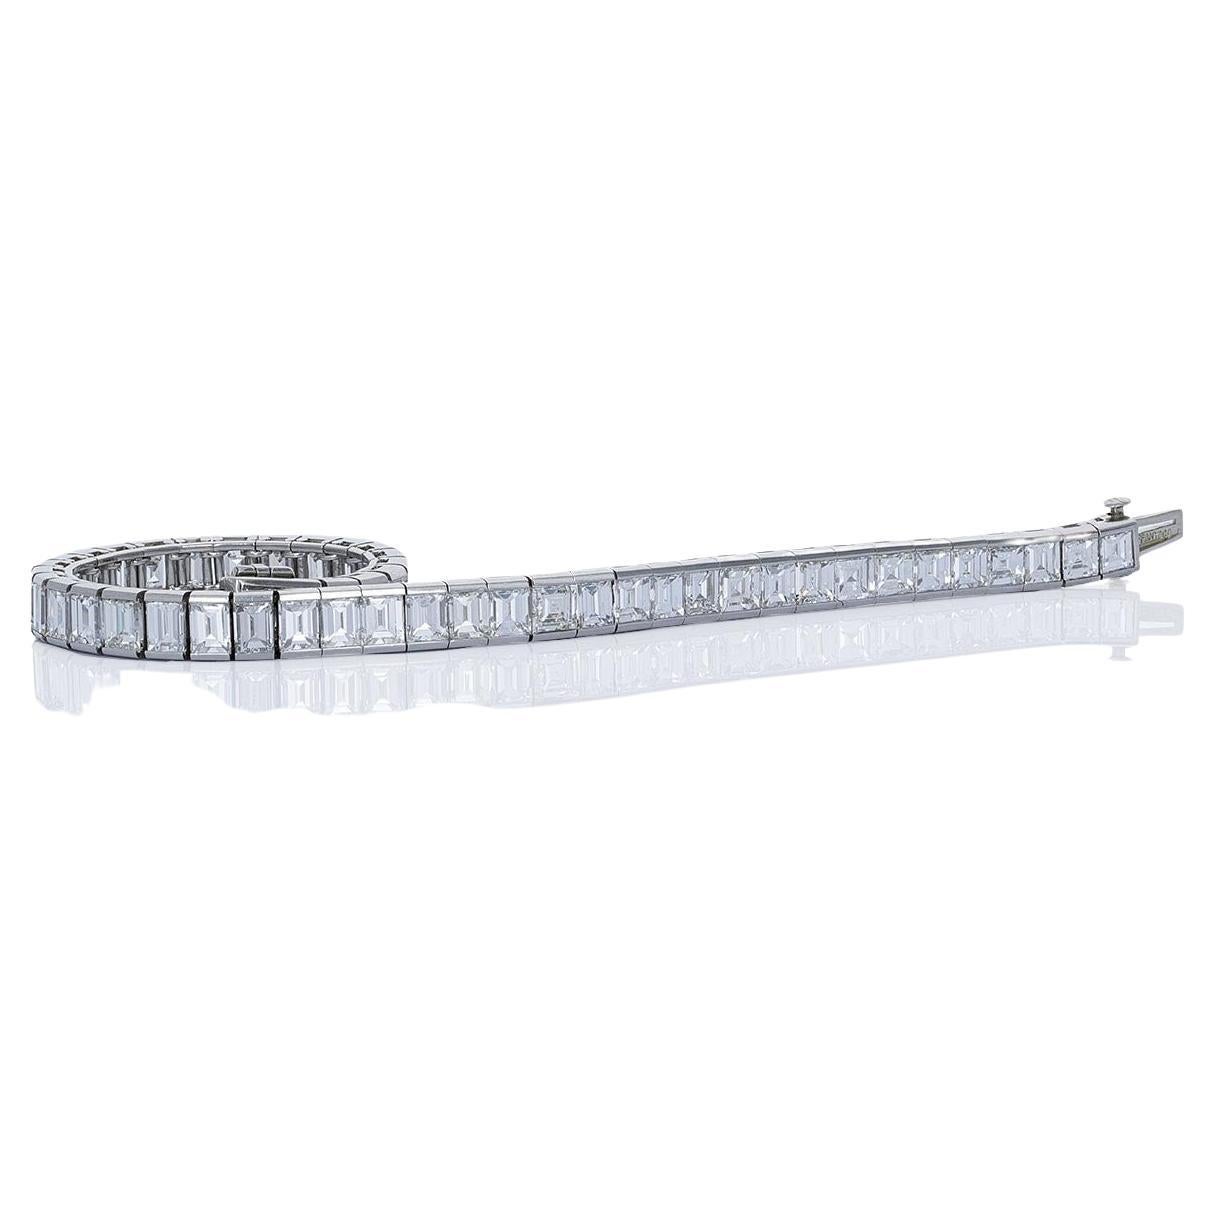 Tiffany & Co. 1950's, straight line emerald cut diamond platinum tennis bracelet. The bracelet was made beautifully and has been kept in pristine condition. There are a total of 48 emerald cut diamonds weighing approximately 16 carats. The diamonds